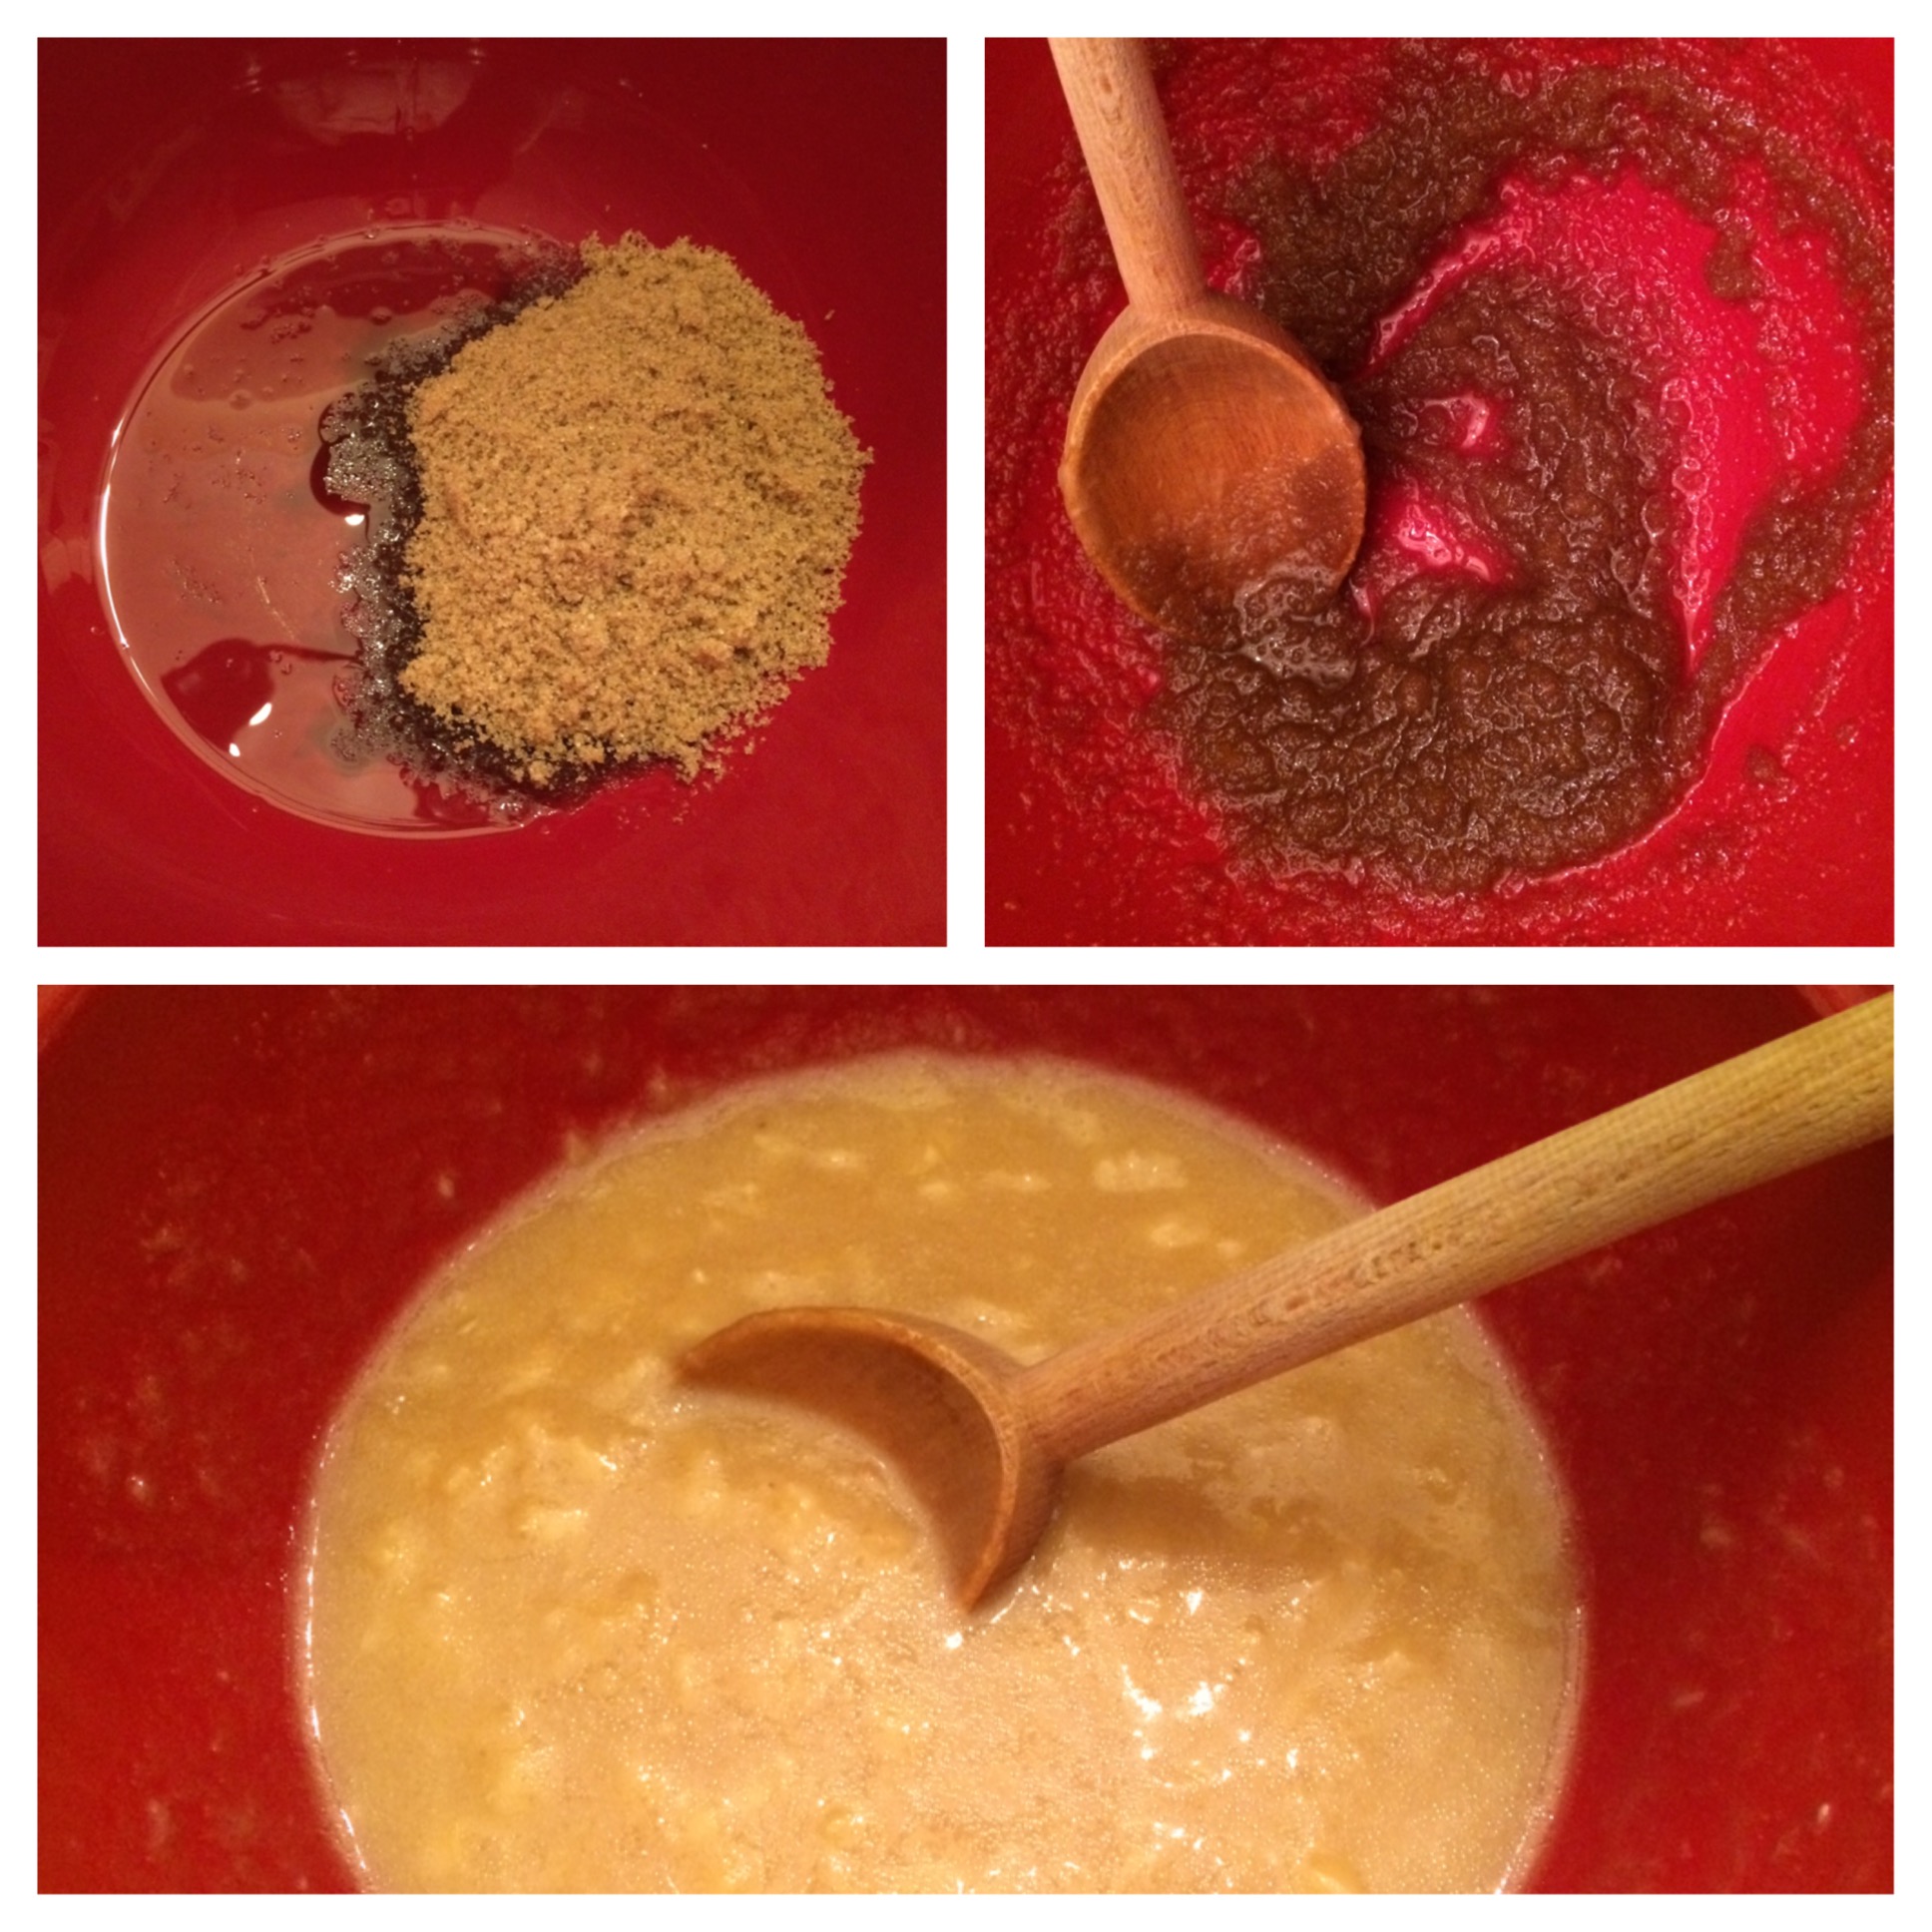 The oil and brown sugar combo combined with the banana lemon juice mixture